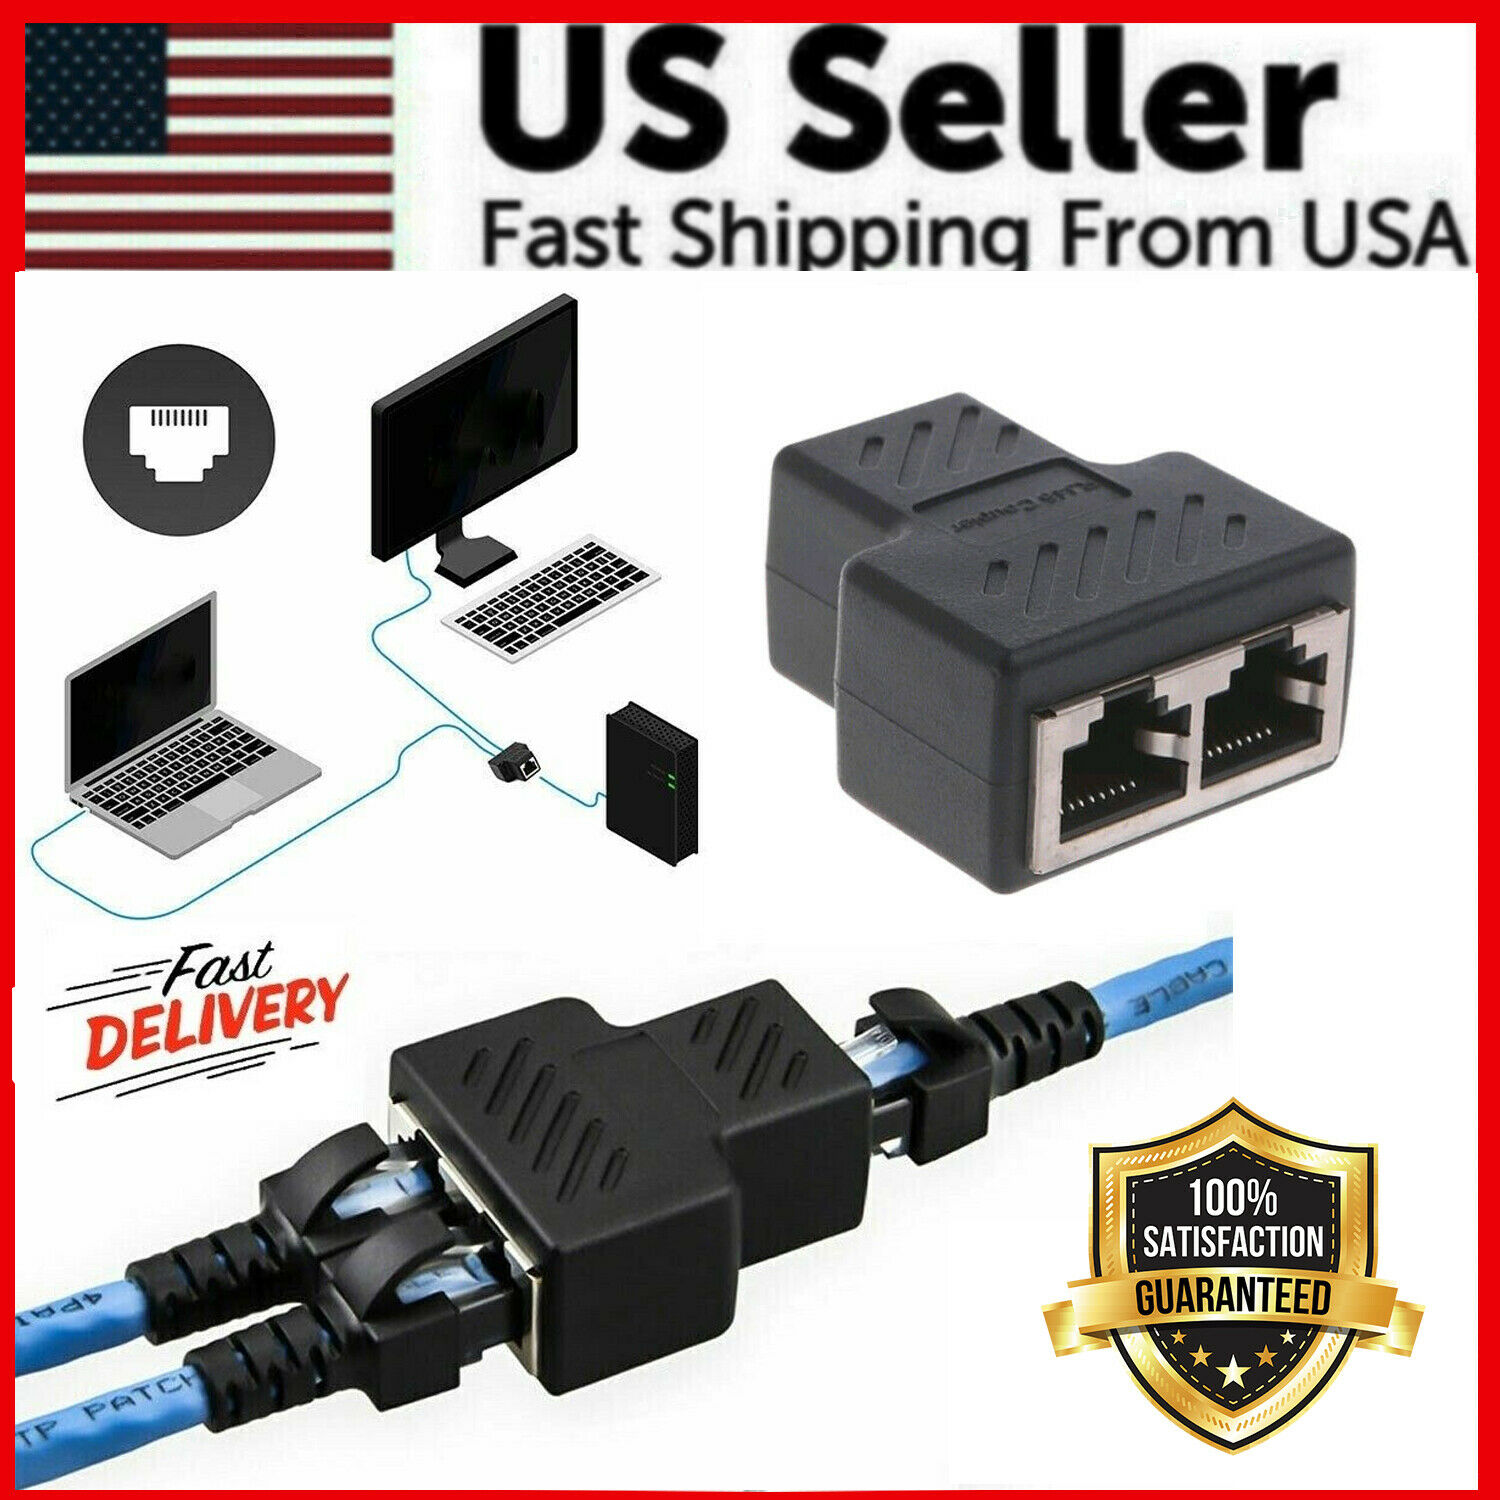 Rj45 Splitter Adapter 1 To 2 Ways Dual Female Port Cat5/6/7 Lan Ethernet Cable